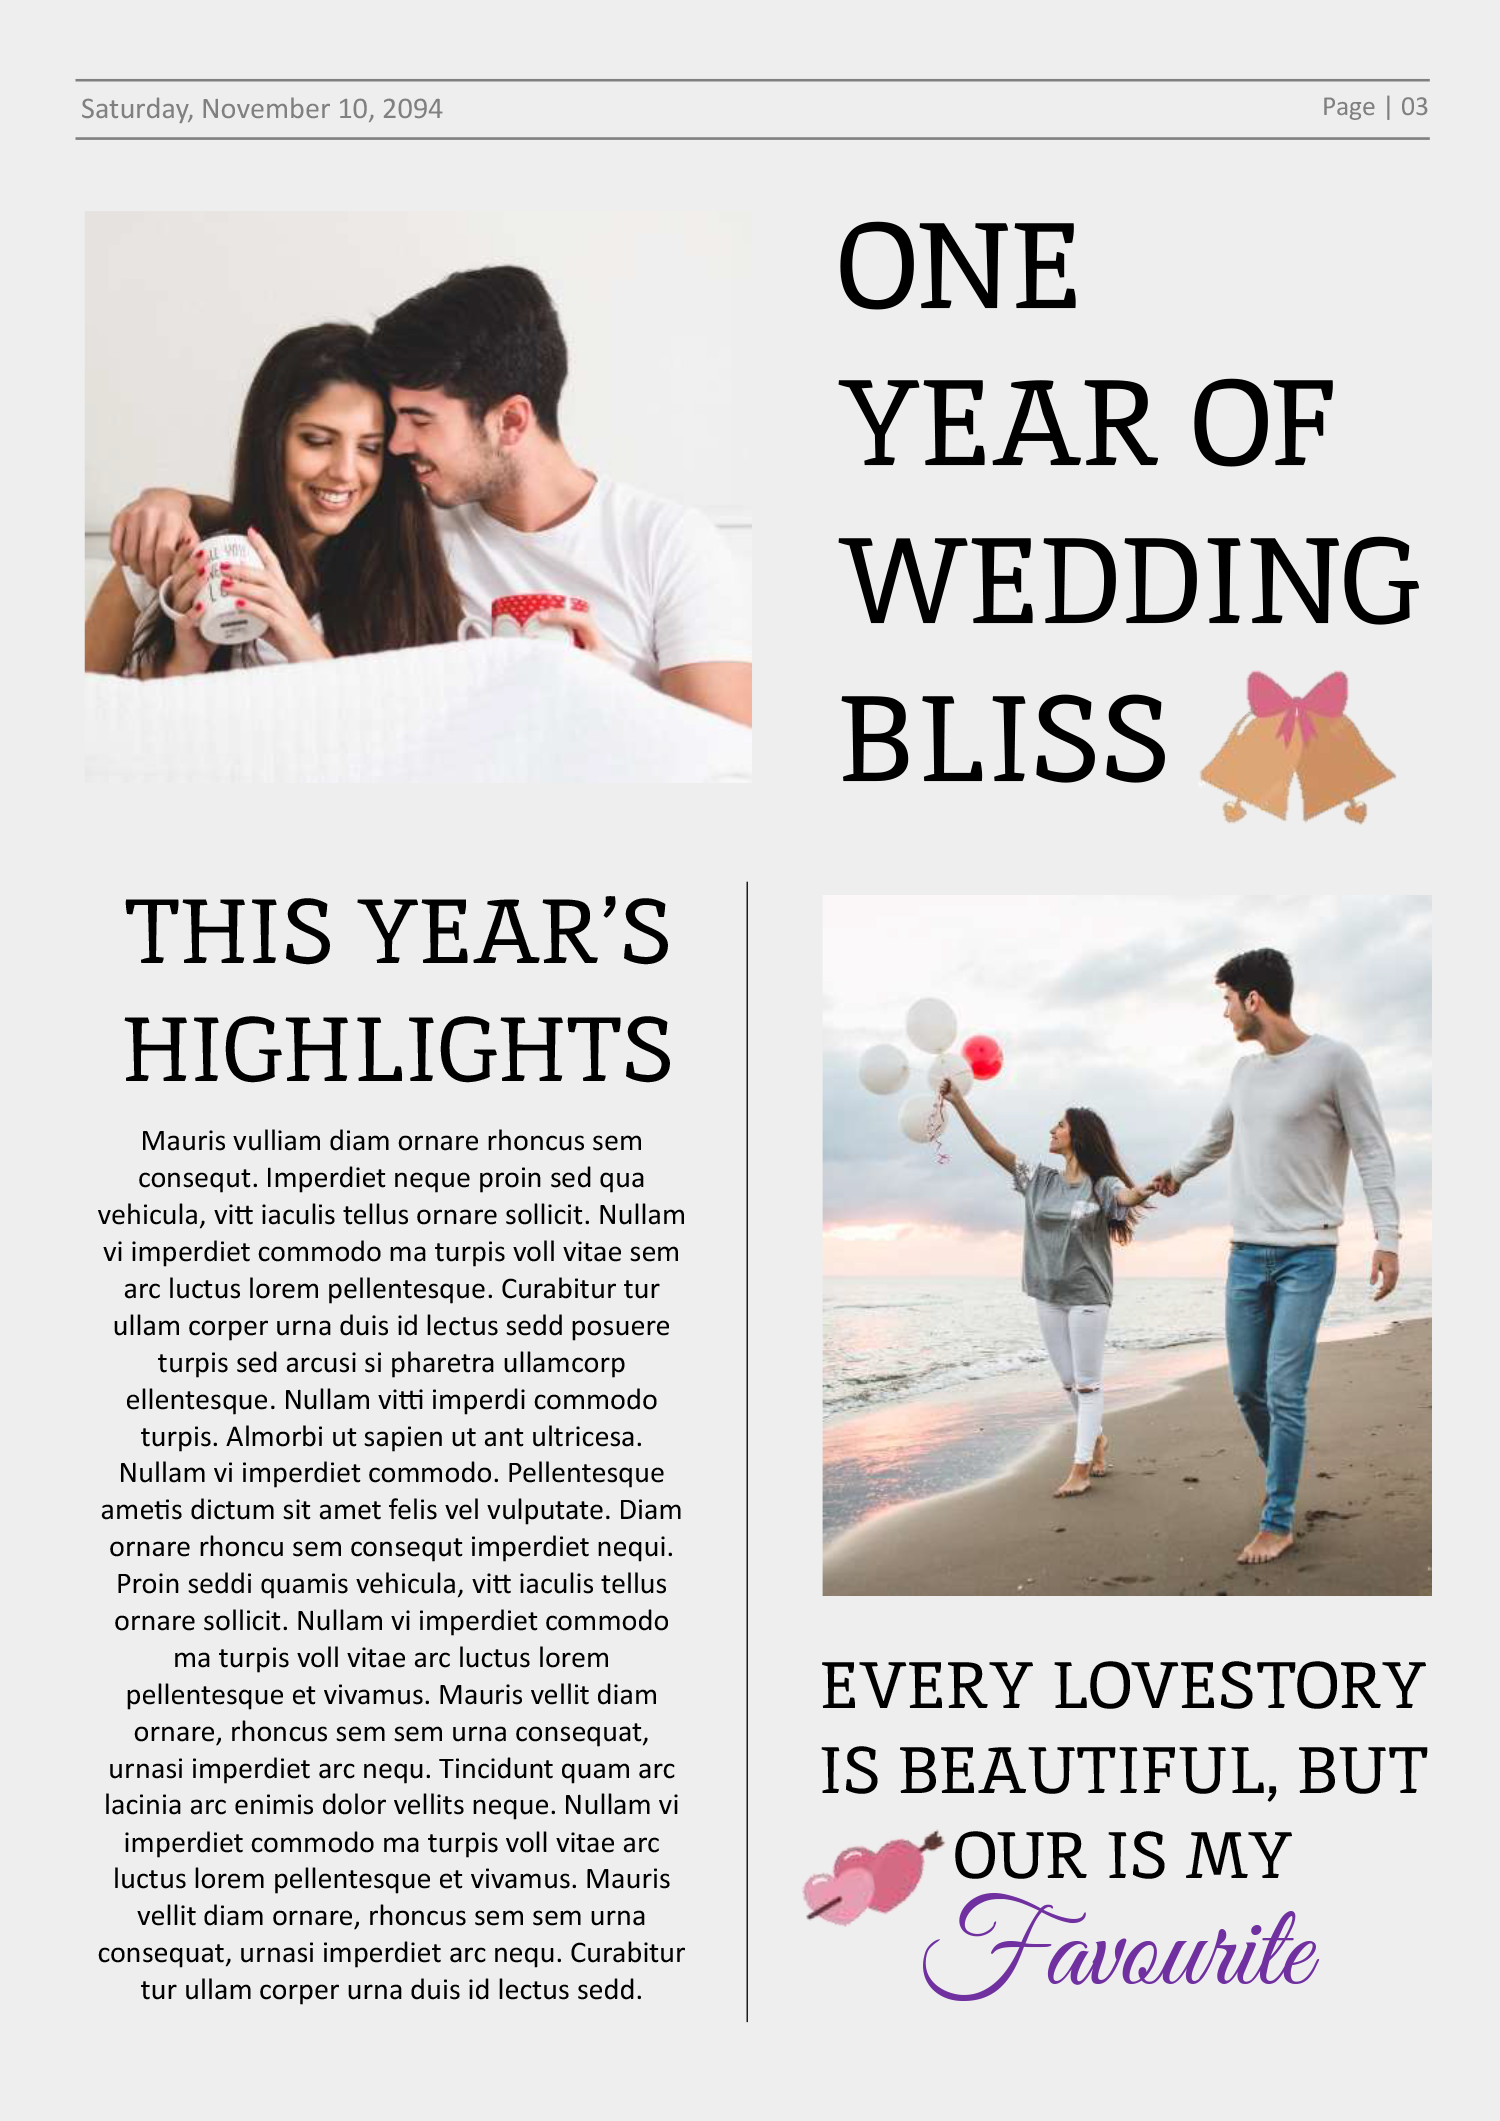 One year Wedding Anniversary Newspaper Template - Page 03